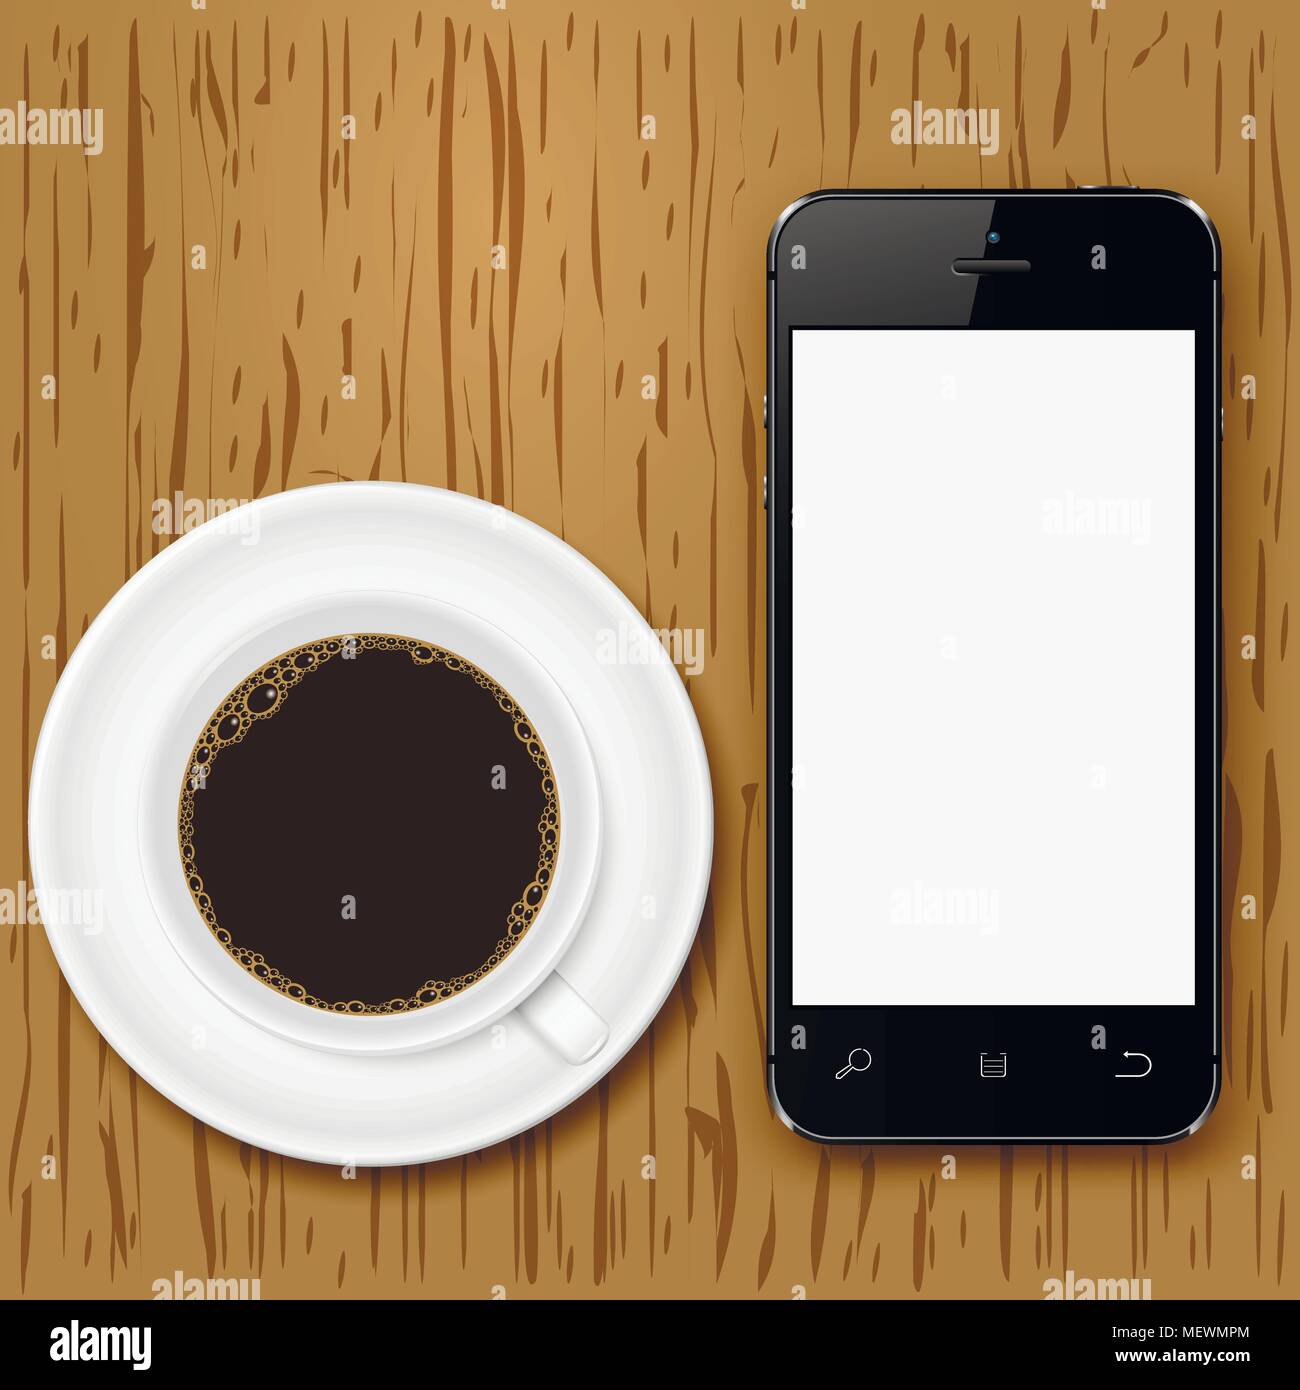 Mobile phone with blank screen and coffee cup on wooden desk. Top view. Vector illustration. Stock Vector